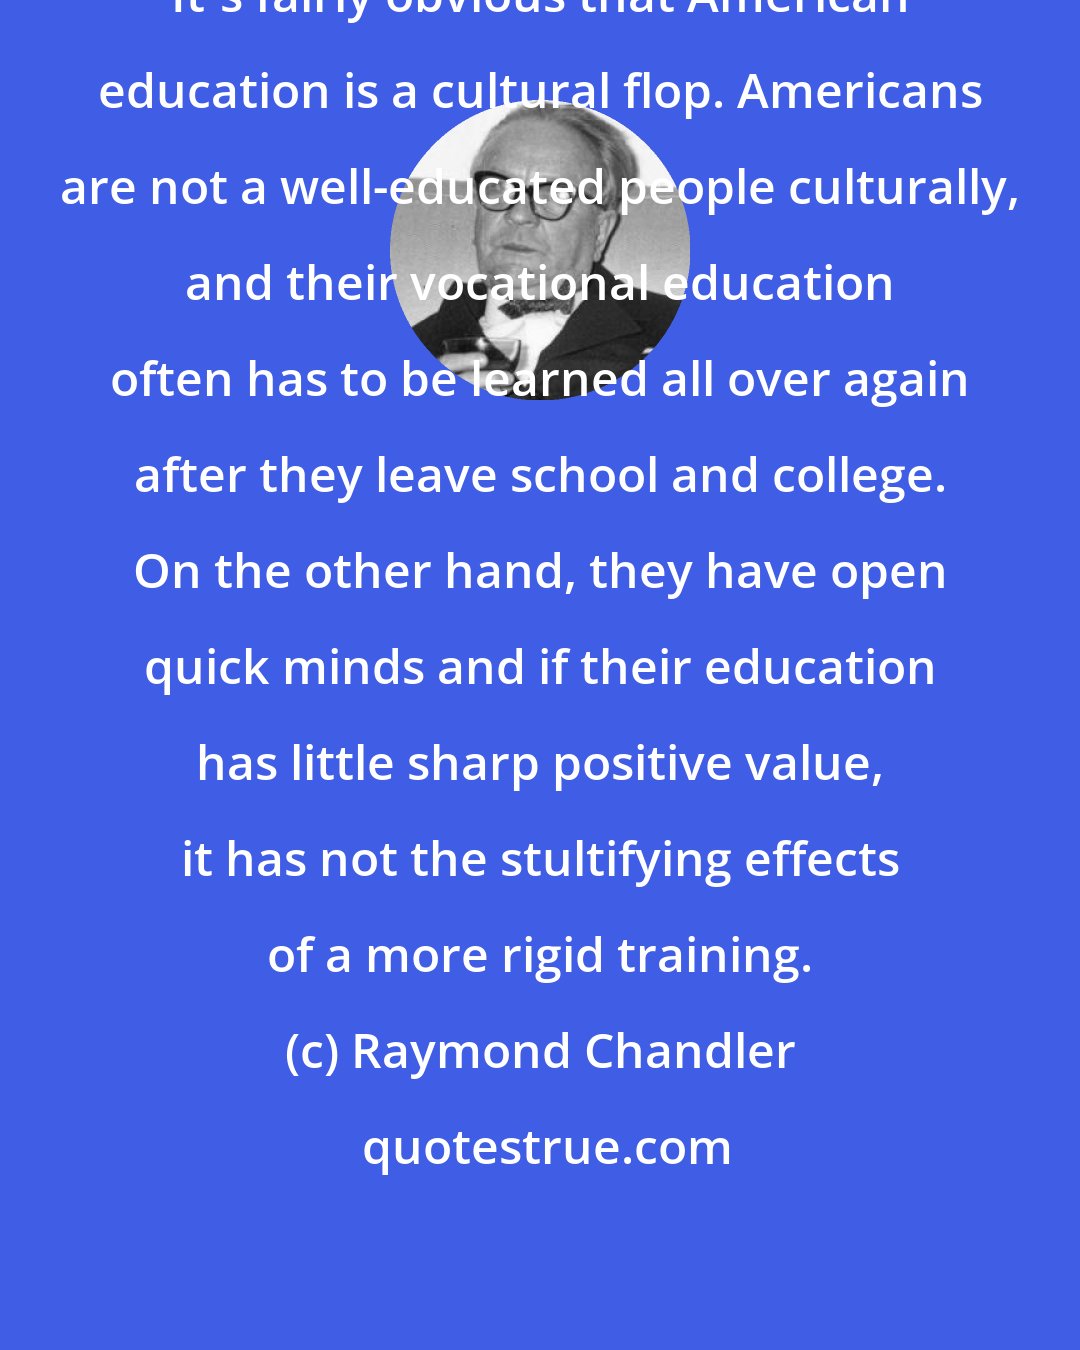 Raymond Chandler: It's fairly obvious that American education is a cultural flop. Americans are not a well-educated people culturally, and their vocational education often has to be learned all over again after they leave school and college. On the other hand, they have open quick minds and if their education has little sharp positive value, it has not the stultifying effects of a more rigid training.